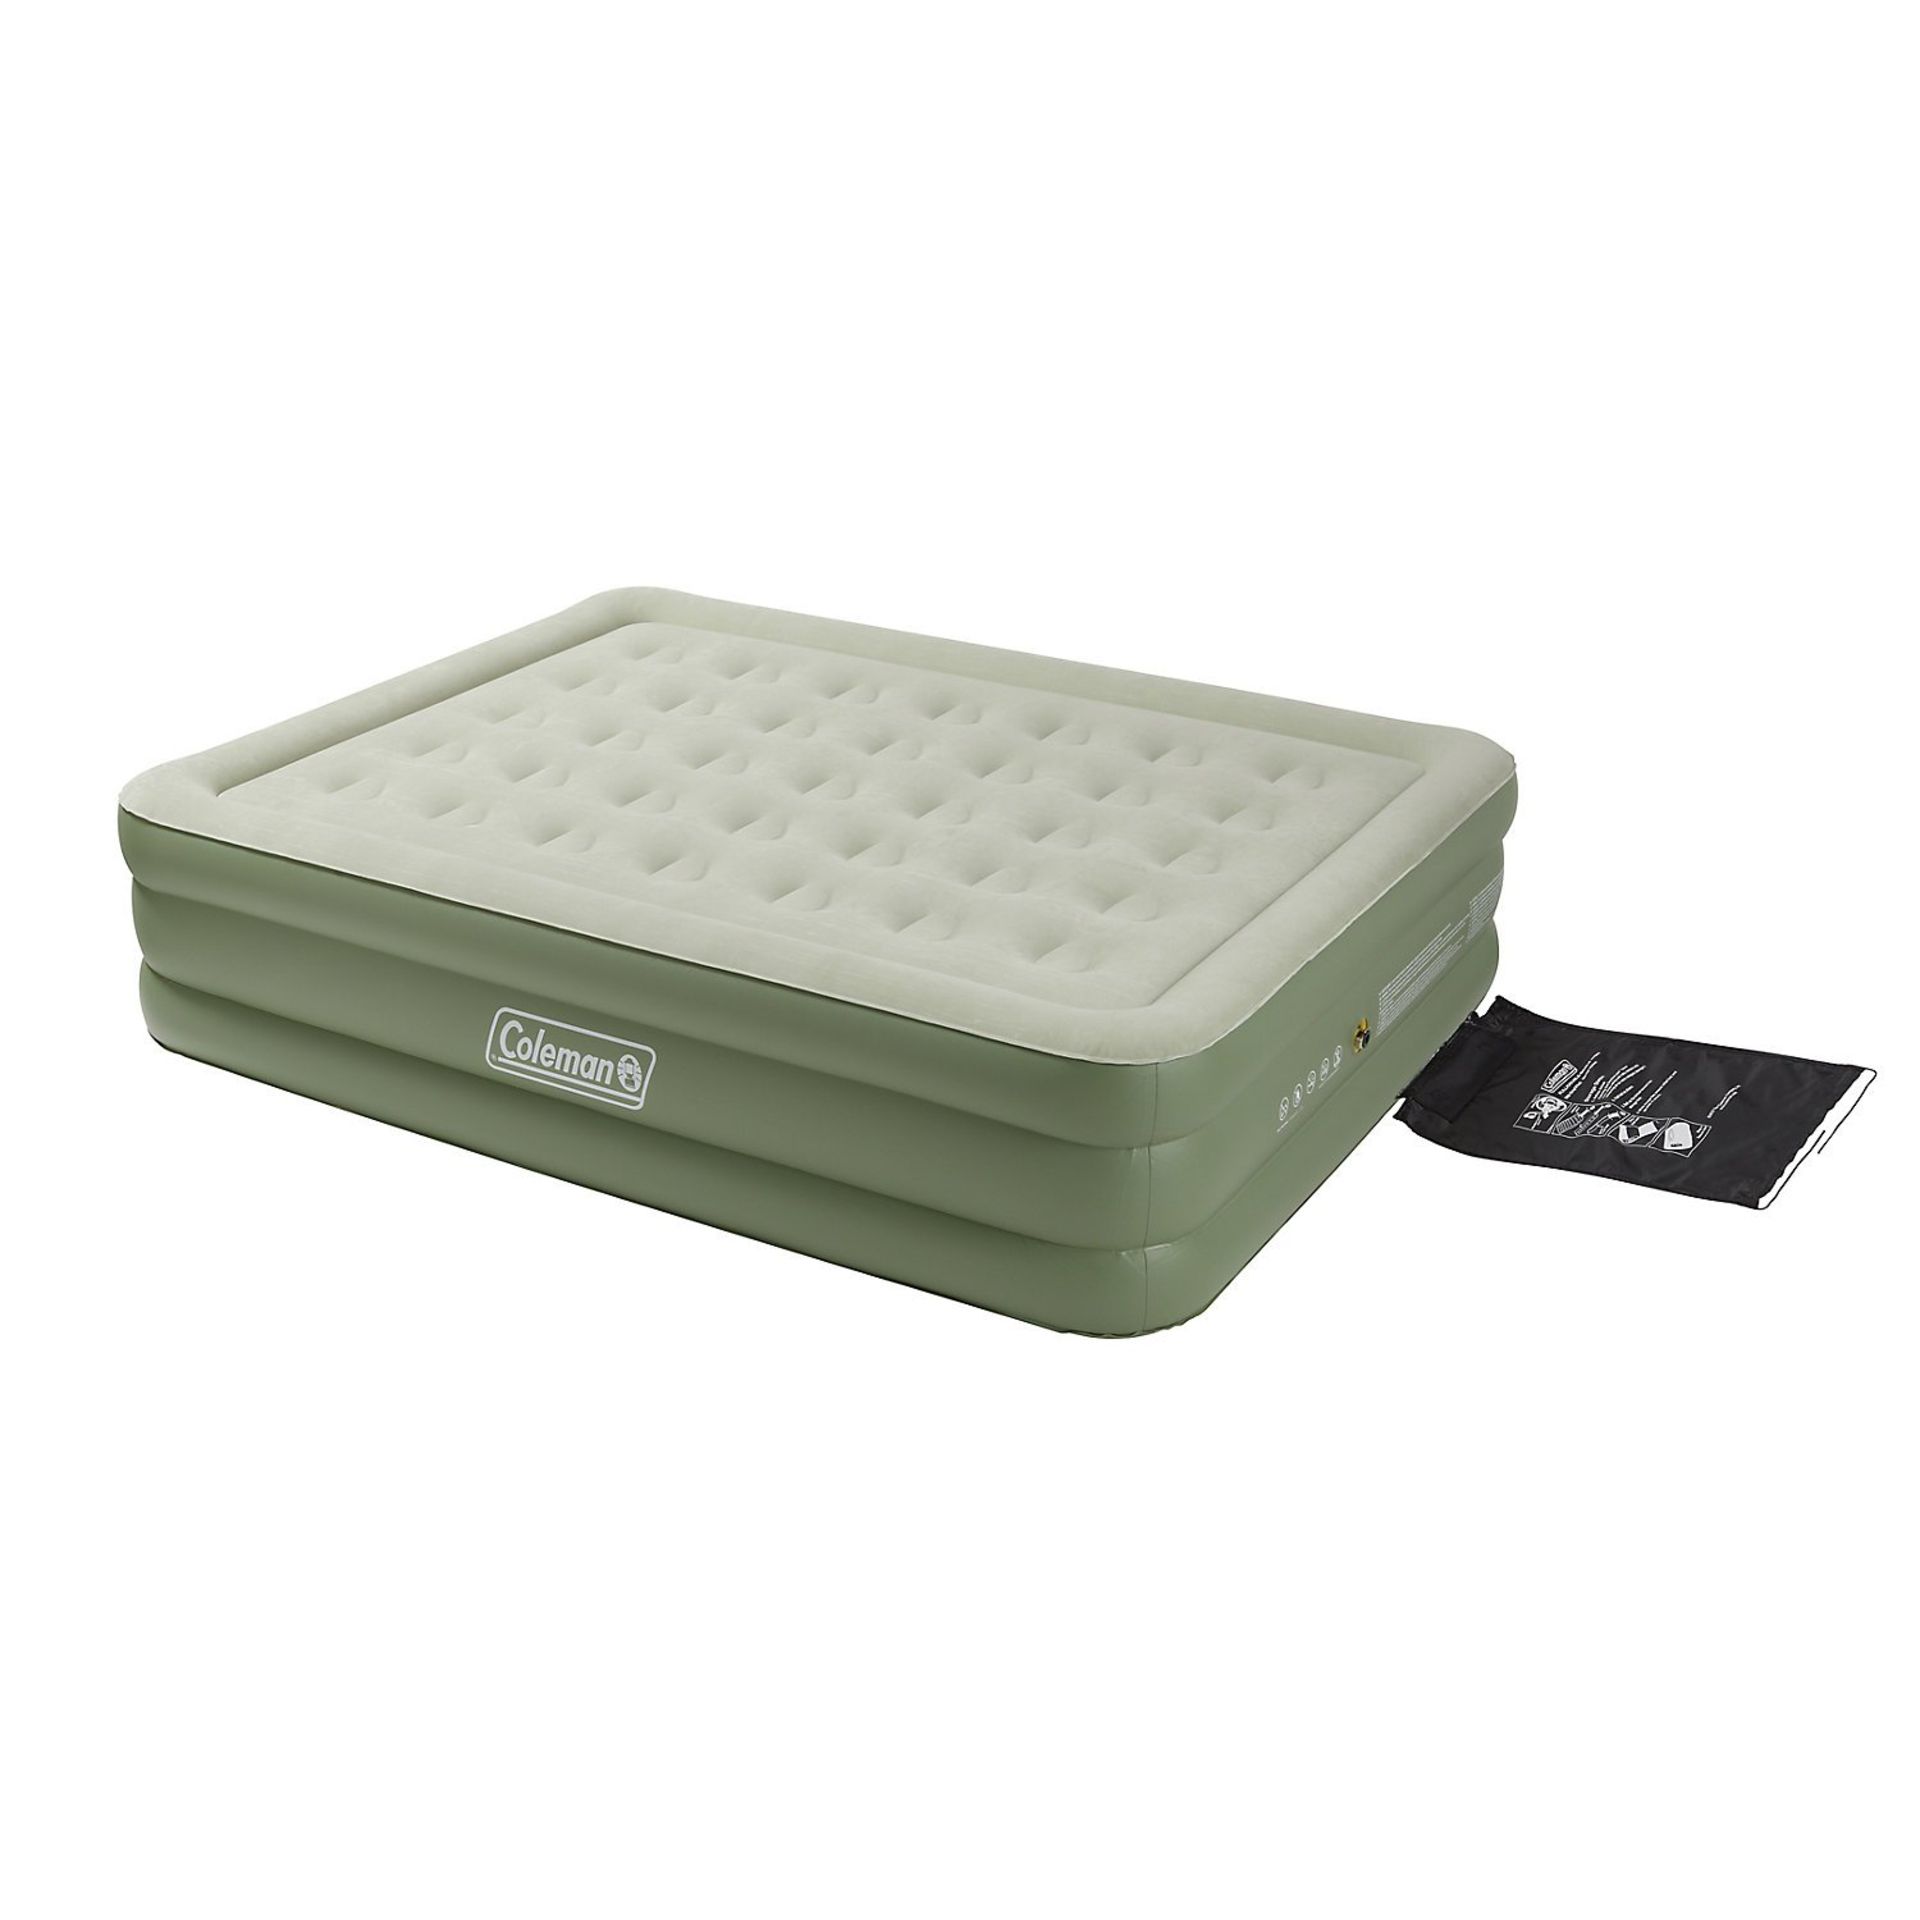 Coleman Maxi Comfort Raised King Airbed RRP £89.99.